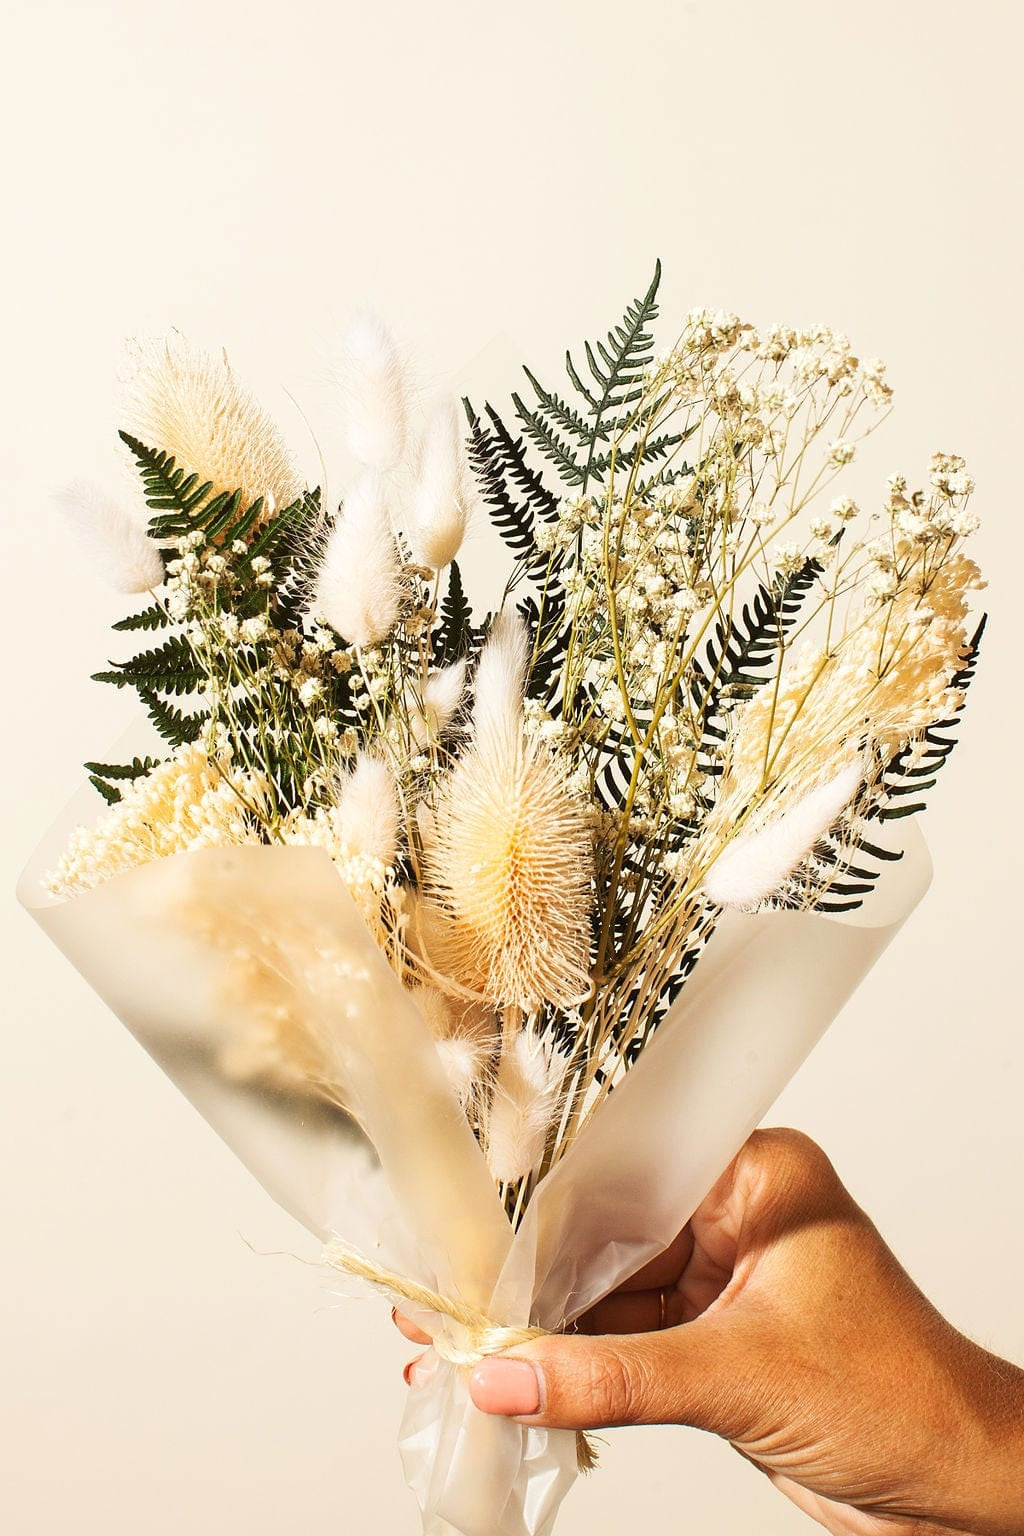 This dried bouquet is carefully arranged by a team of designers in Idlewild Floral Co's California studio, and are made of beautifully preserved long lasting flowers. Perfect paired with a bud vase or as a gift for any occasion. Each bouquet is 12"-14" long x 4"-6" wide.